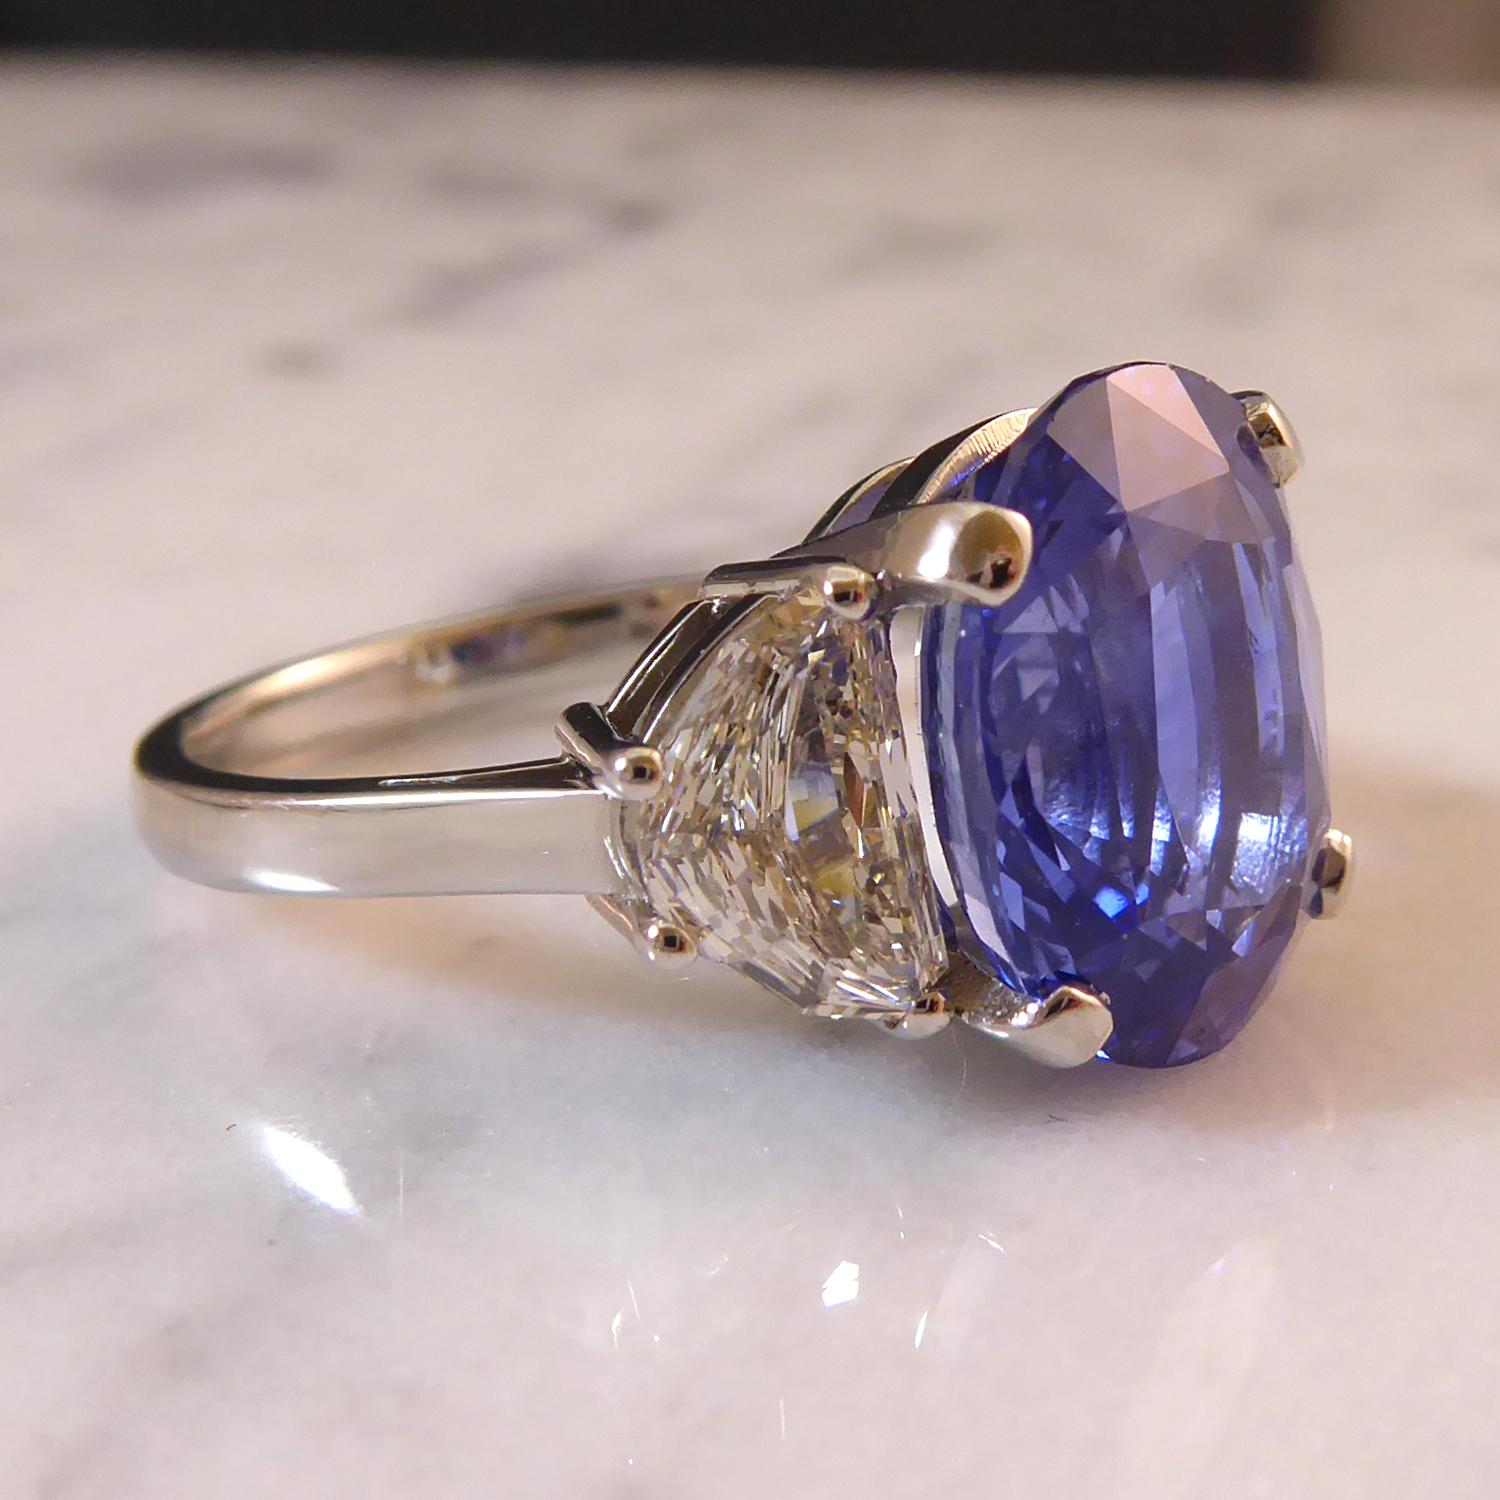 A standout 7.58ct  oval mixed cut sapphire and half-moon diamond three stone ring.  Centrally set with a pale blue sapphire measuring some 12.59mm x 10.17mm x 6.43mm deep with only light to moderate inclusions and showing some colour banding.  The